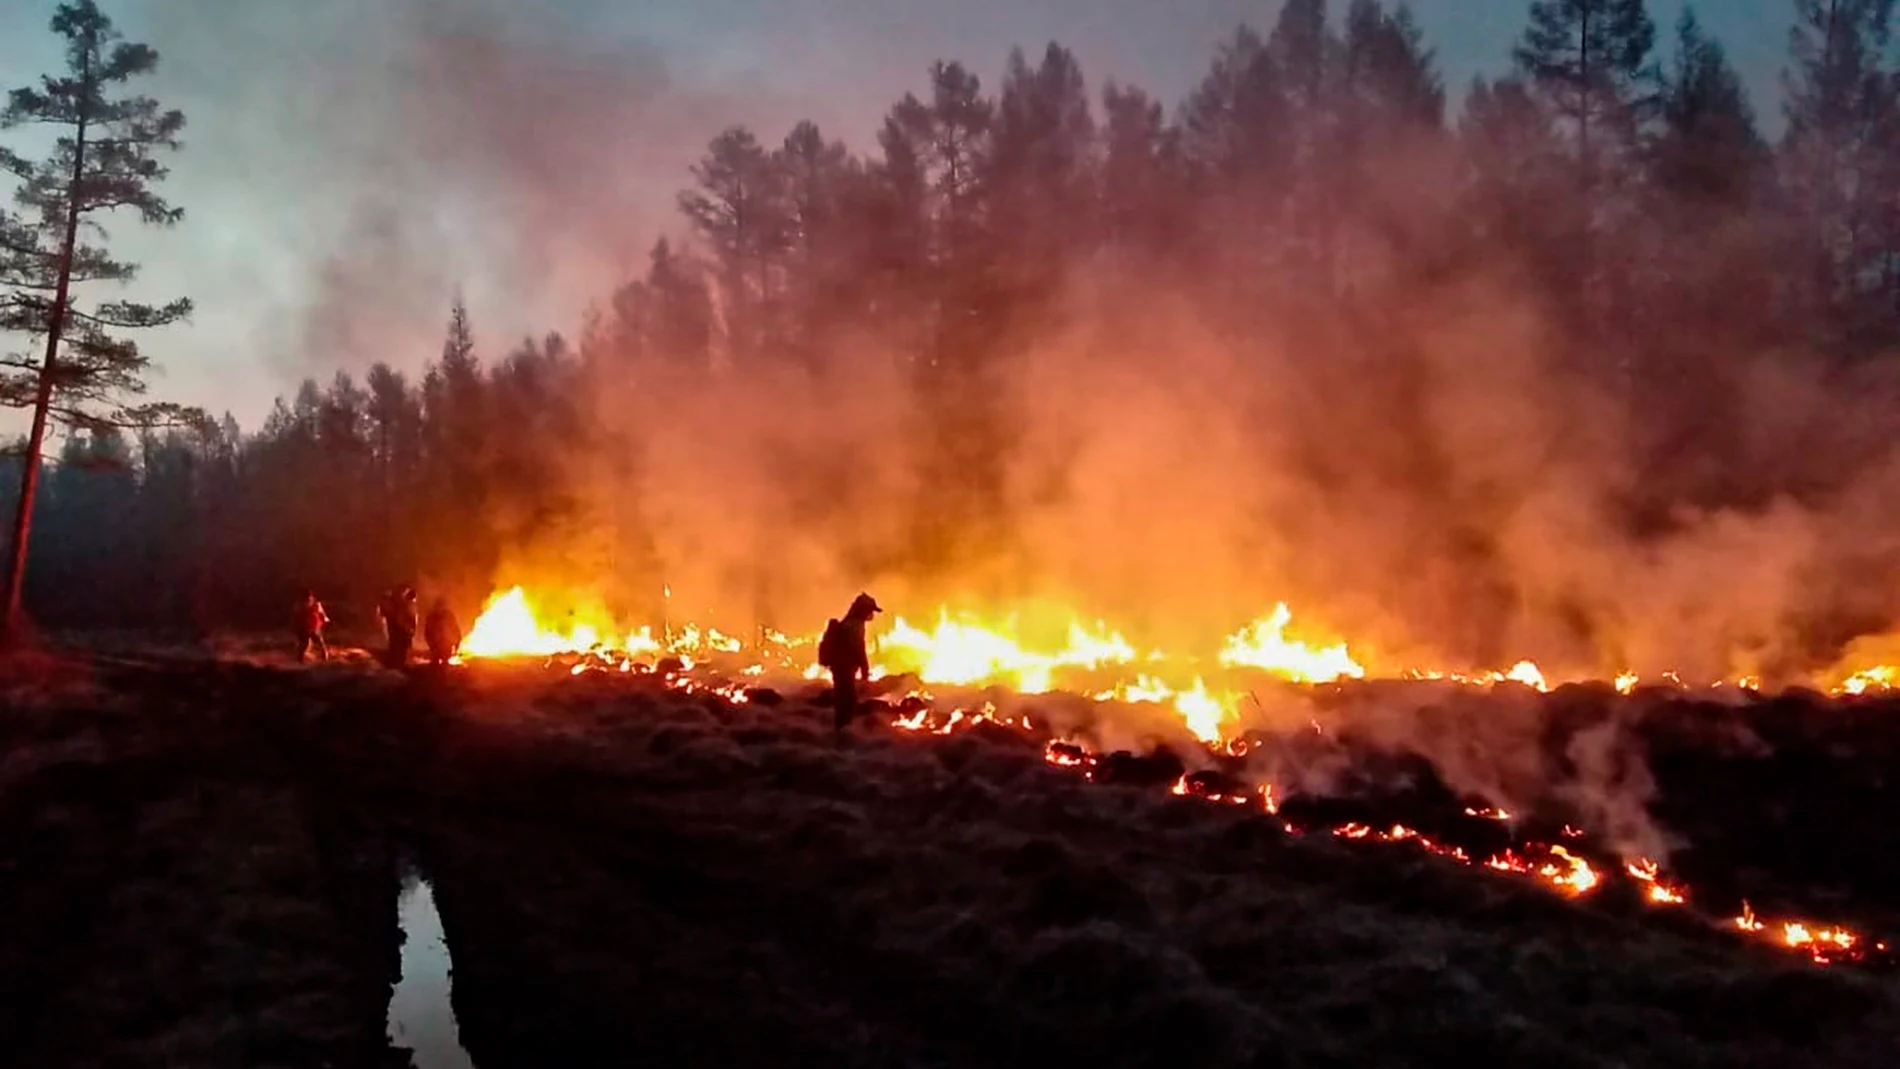 Sakha (Russian Federation), 22/07/2021.- A handout photo made available by the Ministry for Nature Protection of the Sakha Republic (Yakutia) on 23 July 2021, shows fire fighters try to extinguish wildfire in the Republic of Sakha (Yakutia), Russia. According to the operational data of Russian Emergency ministry, 216 wildfires are active on the territory of the Republic of Sakha (Yakutia). 2,119 people and 297 pieces of equipment were involved in extinguishing forest fires in Yakutia. (Incendio, Rusia) EFE/EPA/MINISTRY OF NATURE PROTECTION OF YAKUTIA HANDOUT HANDOUT HANDOUT EDITORIAL USE ONLY/NO SALES HANDOUT EDITORIAL USE ONLY/NO SALES